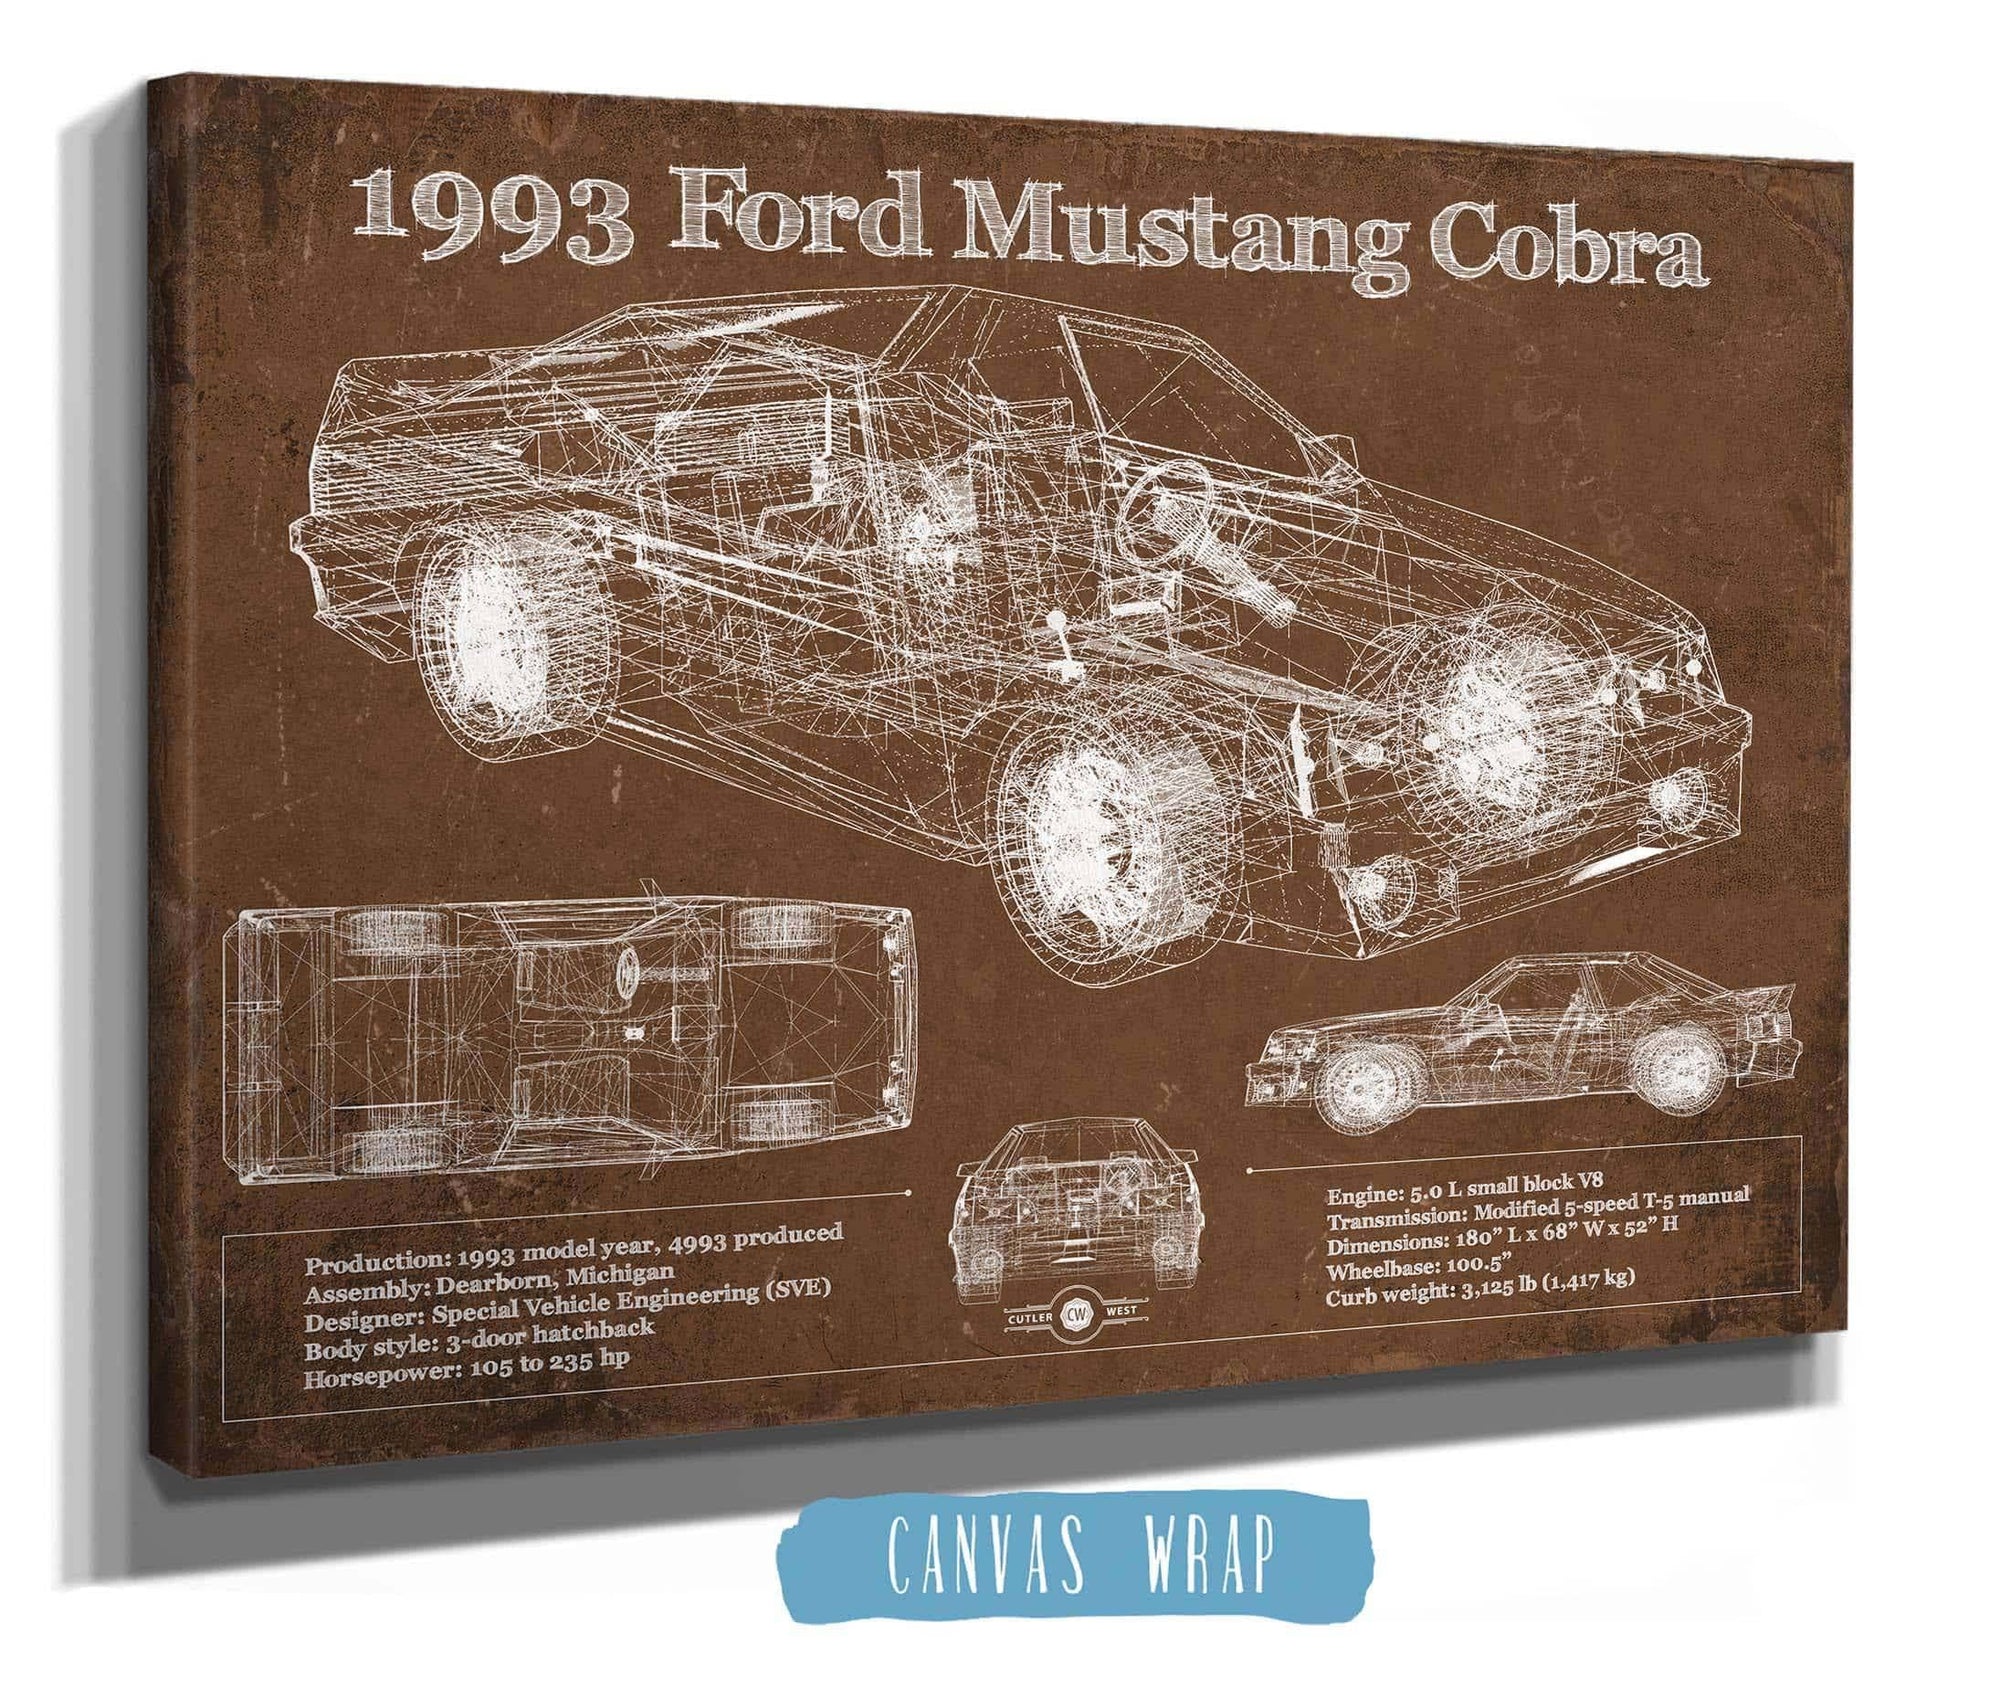 Cutler West Ford Collection 1993 Ford Mustang Cobra Vintage Blueprint Auto Print